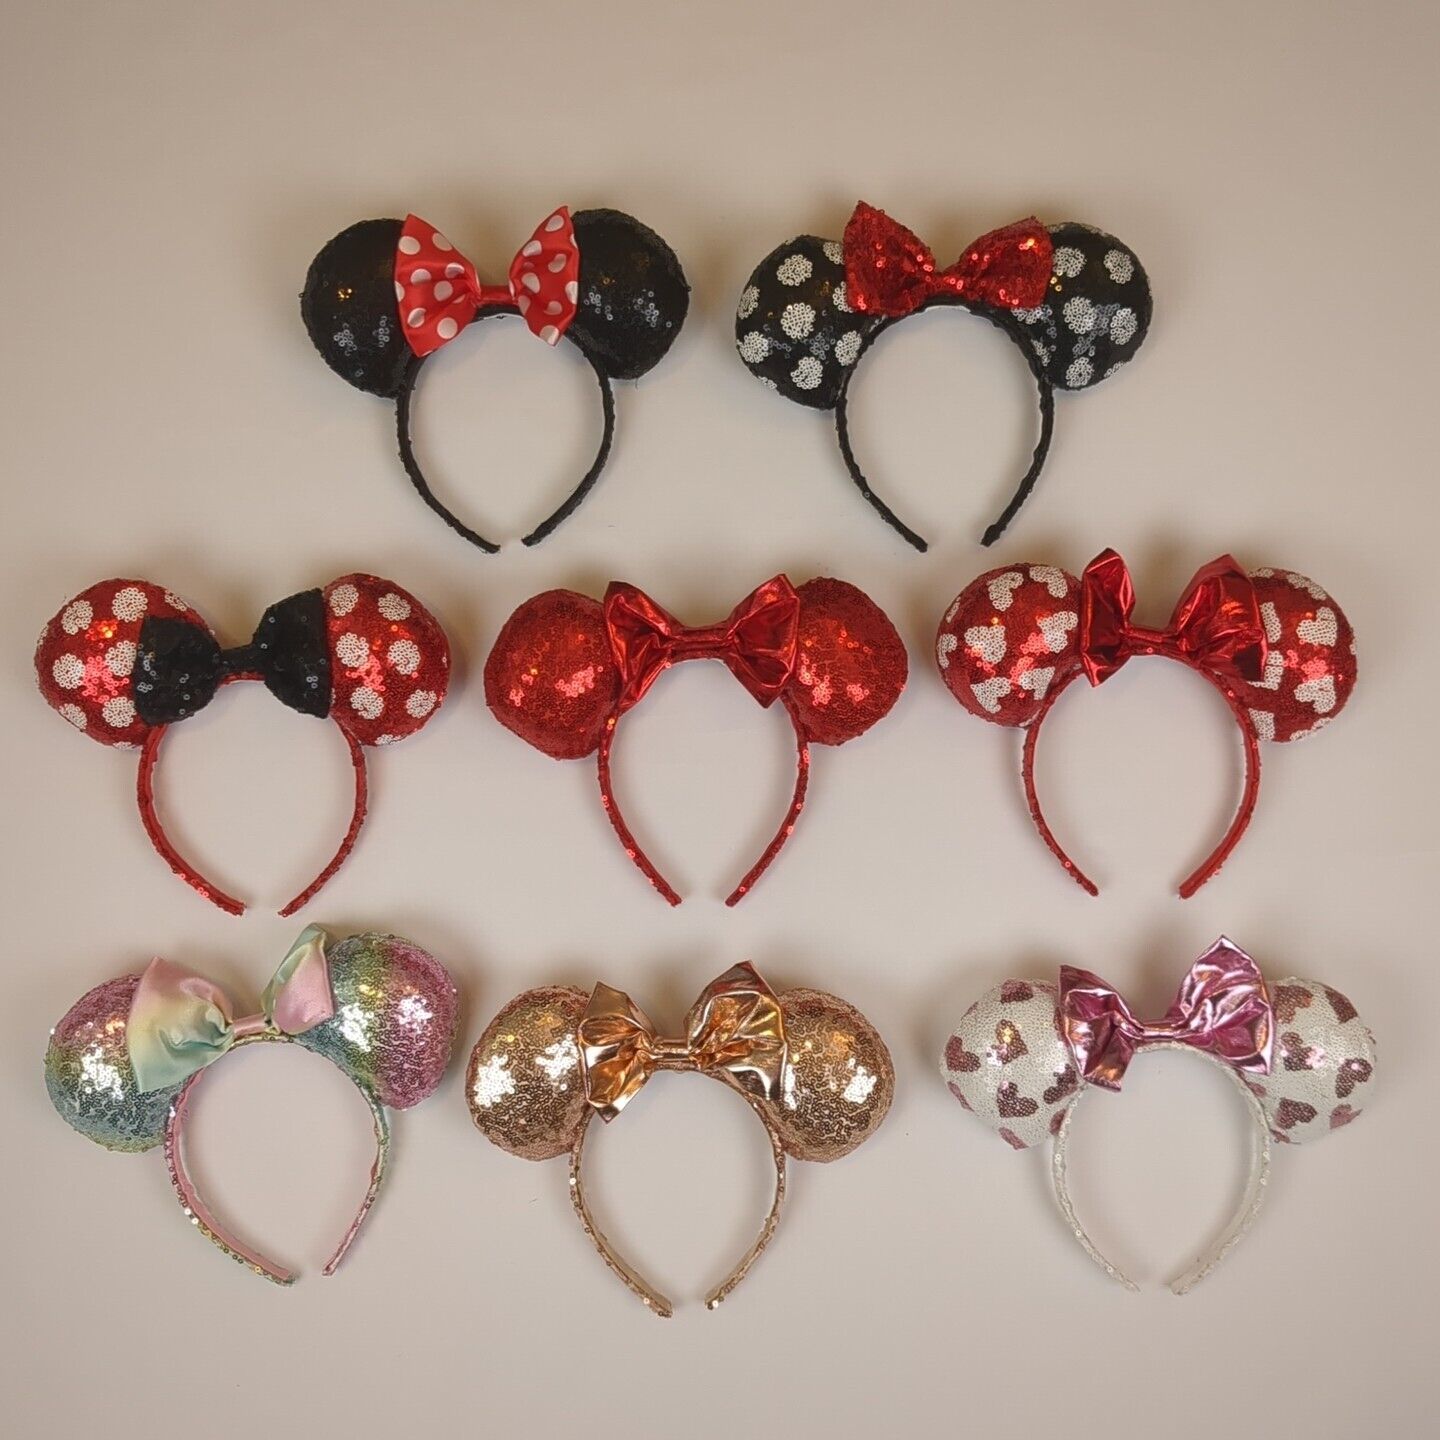 Genuine Disney Minnie Mouse Deluxe Sequined Headbands - Set of 8